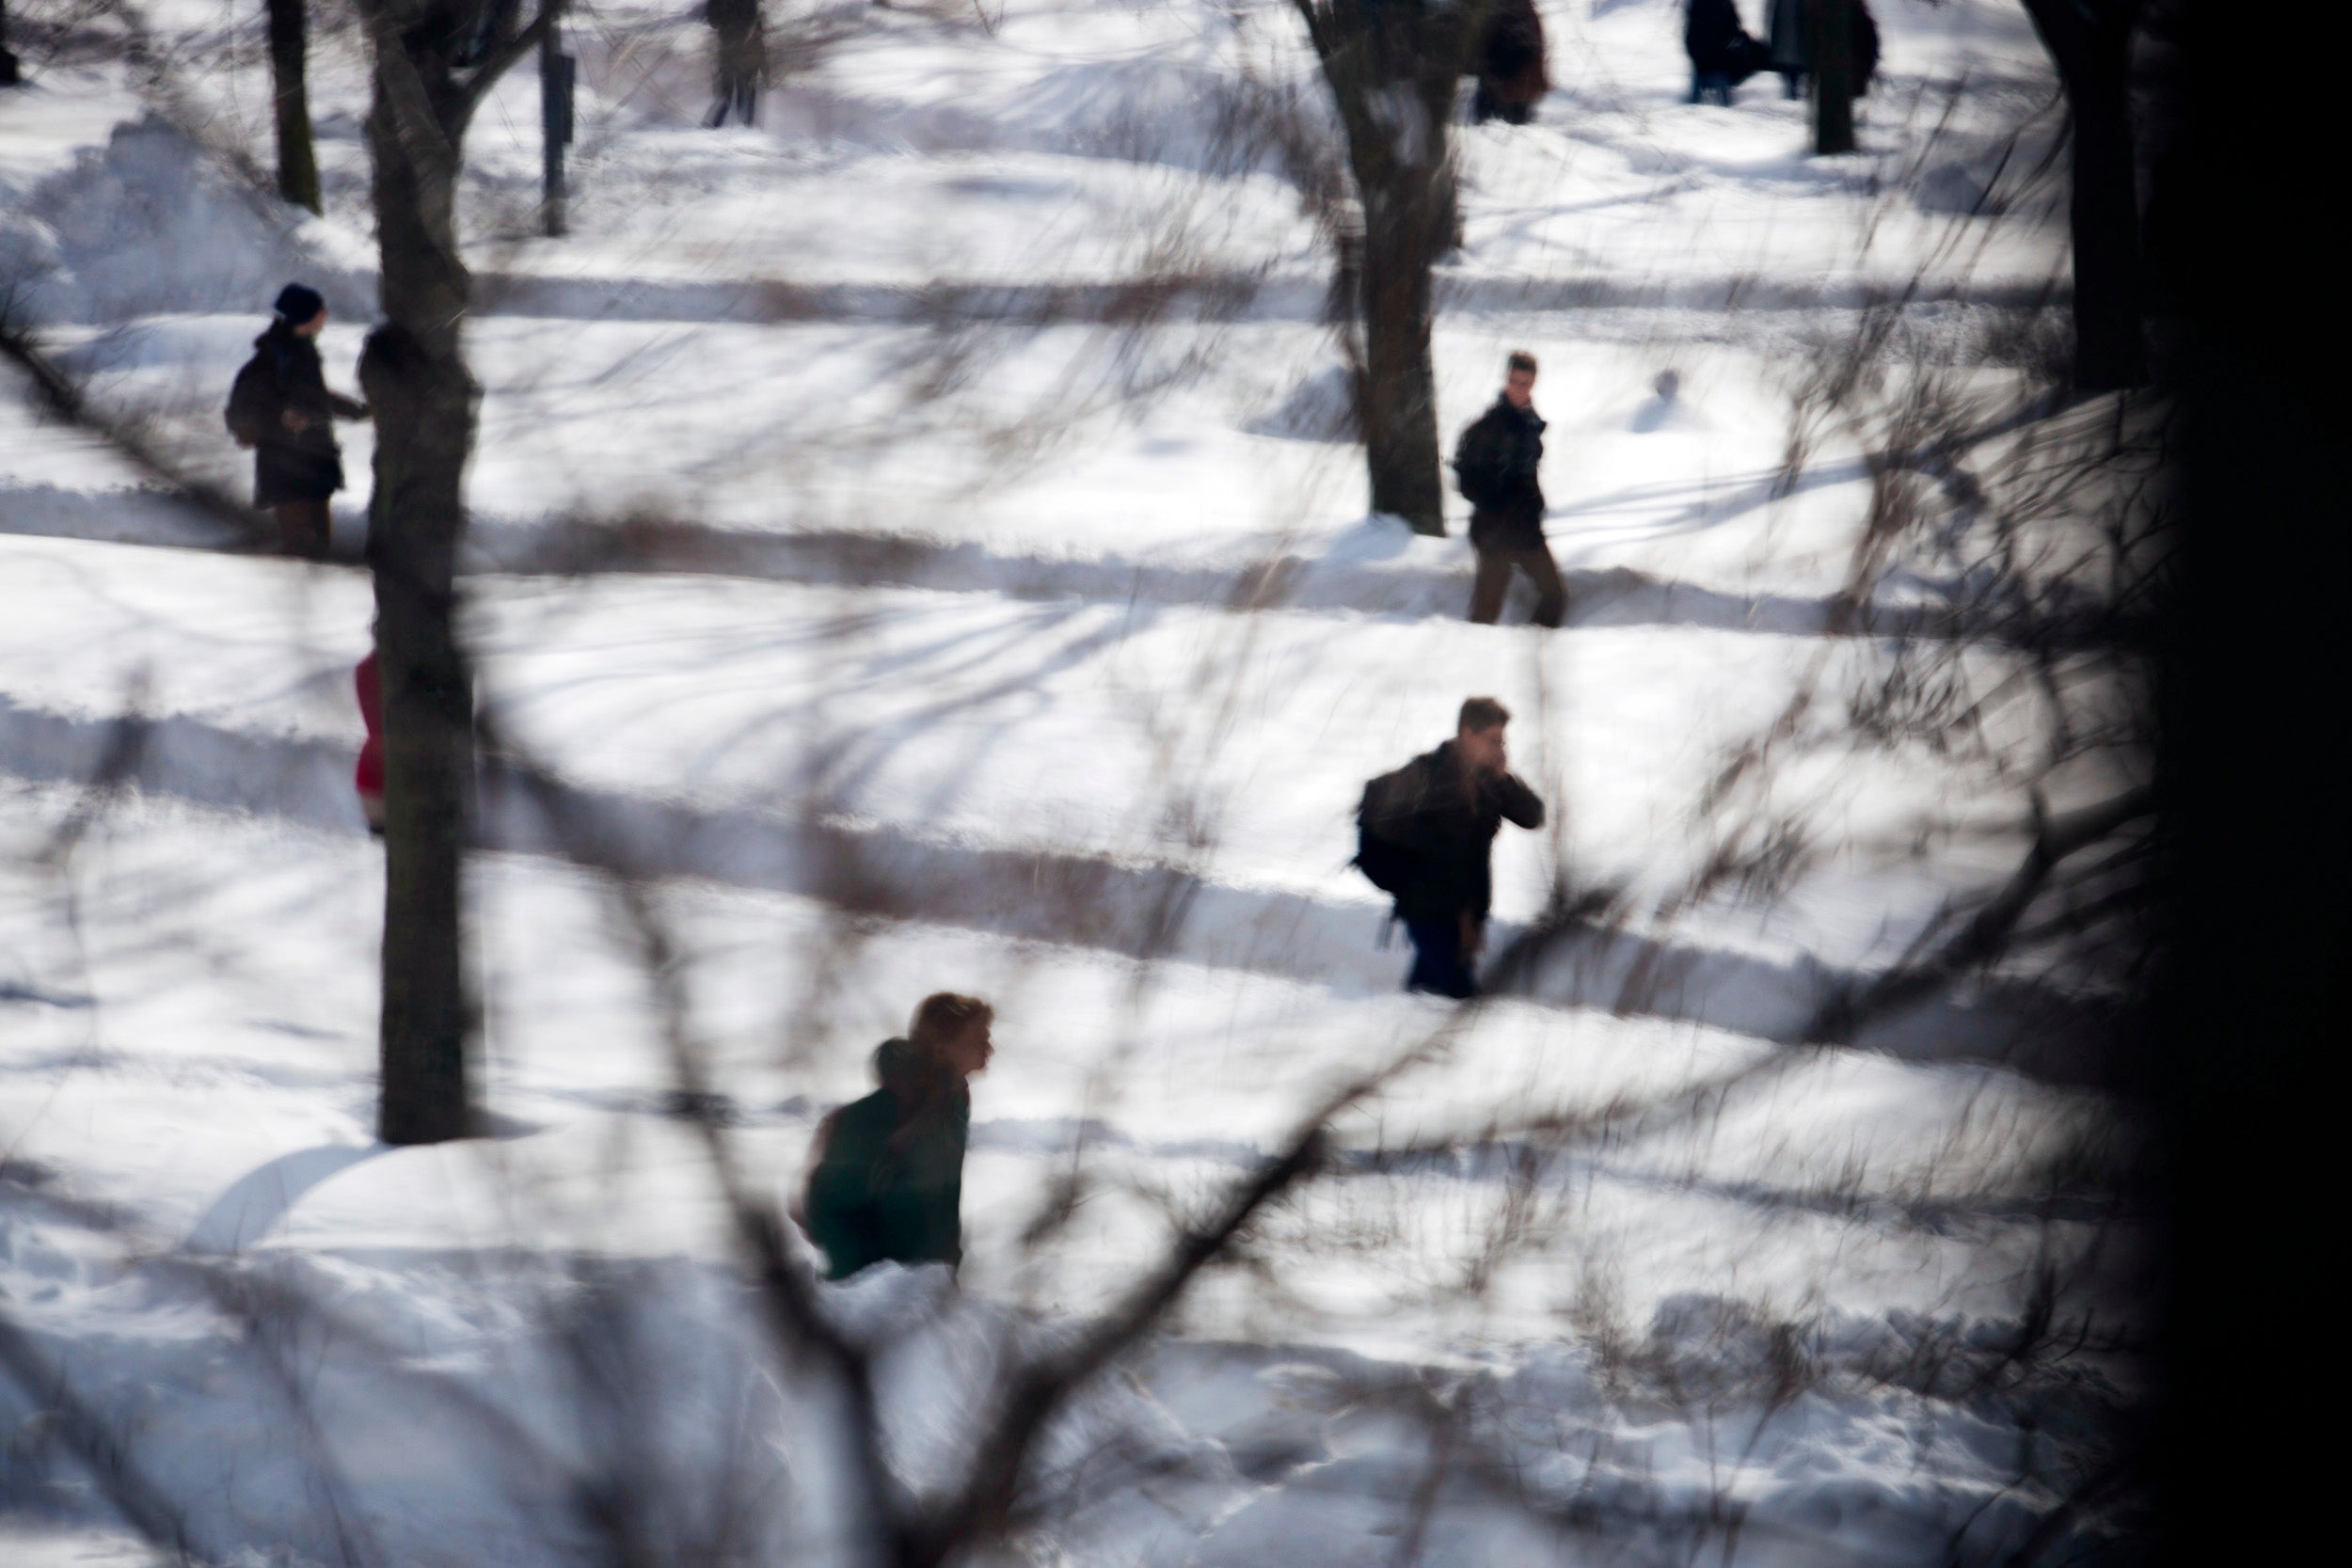 Students walking in snow.